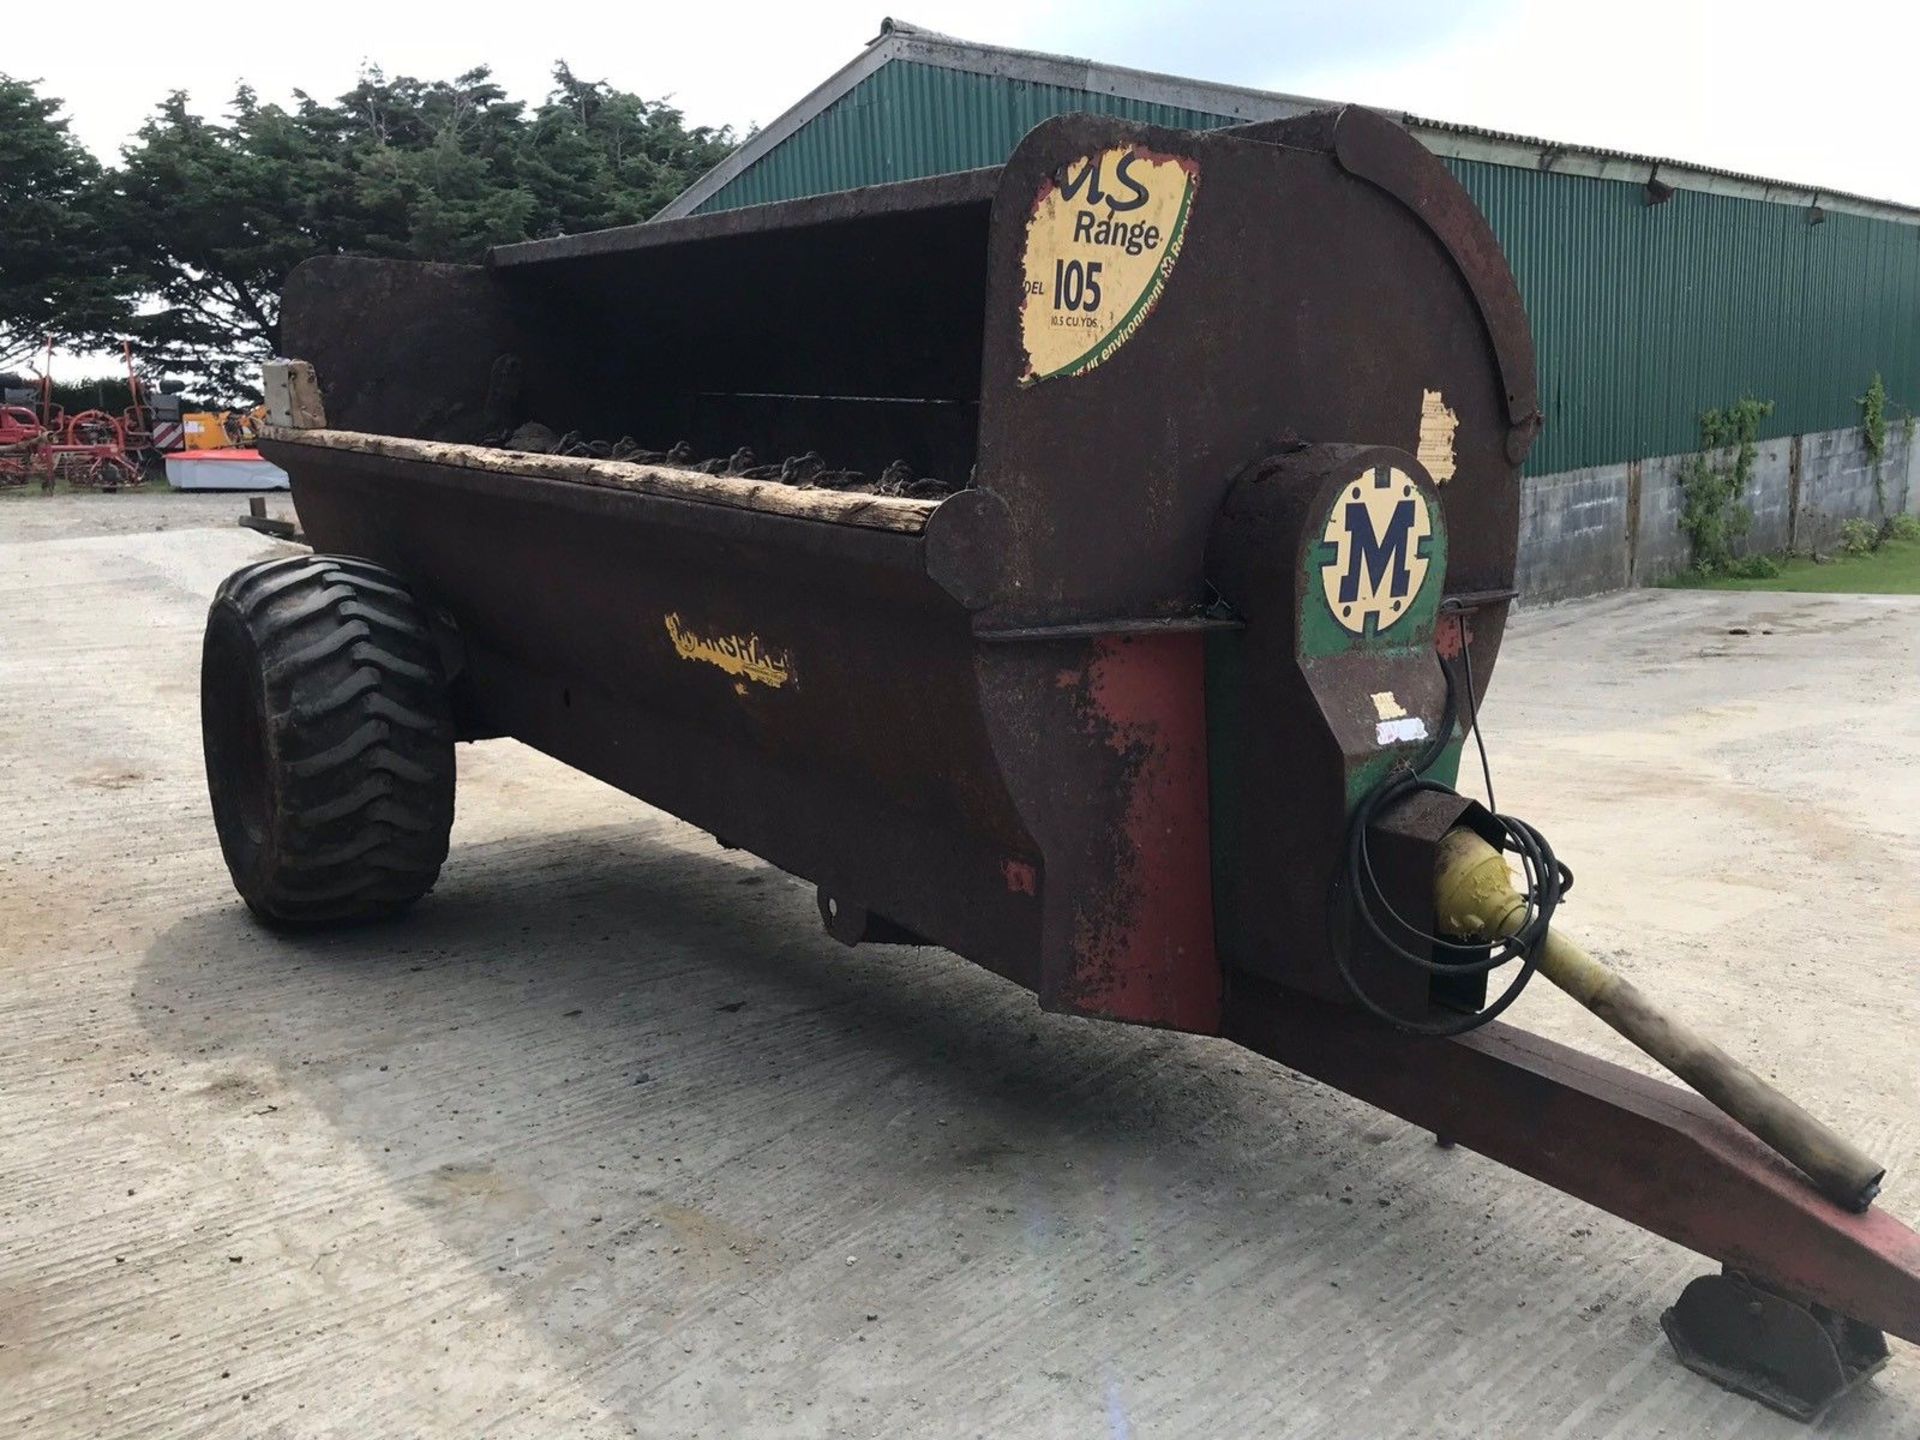 Marshall 105 Dung Spreader, 2010 - Image 9 of 10